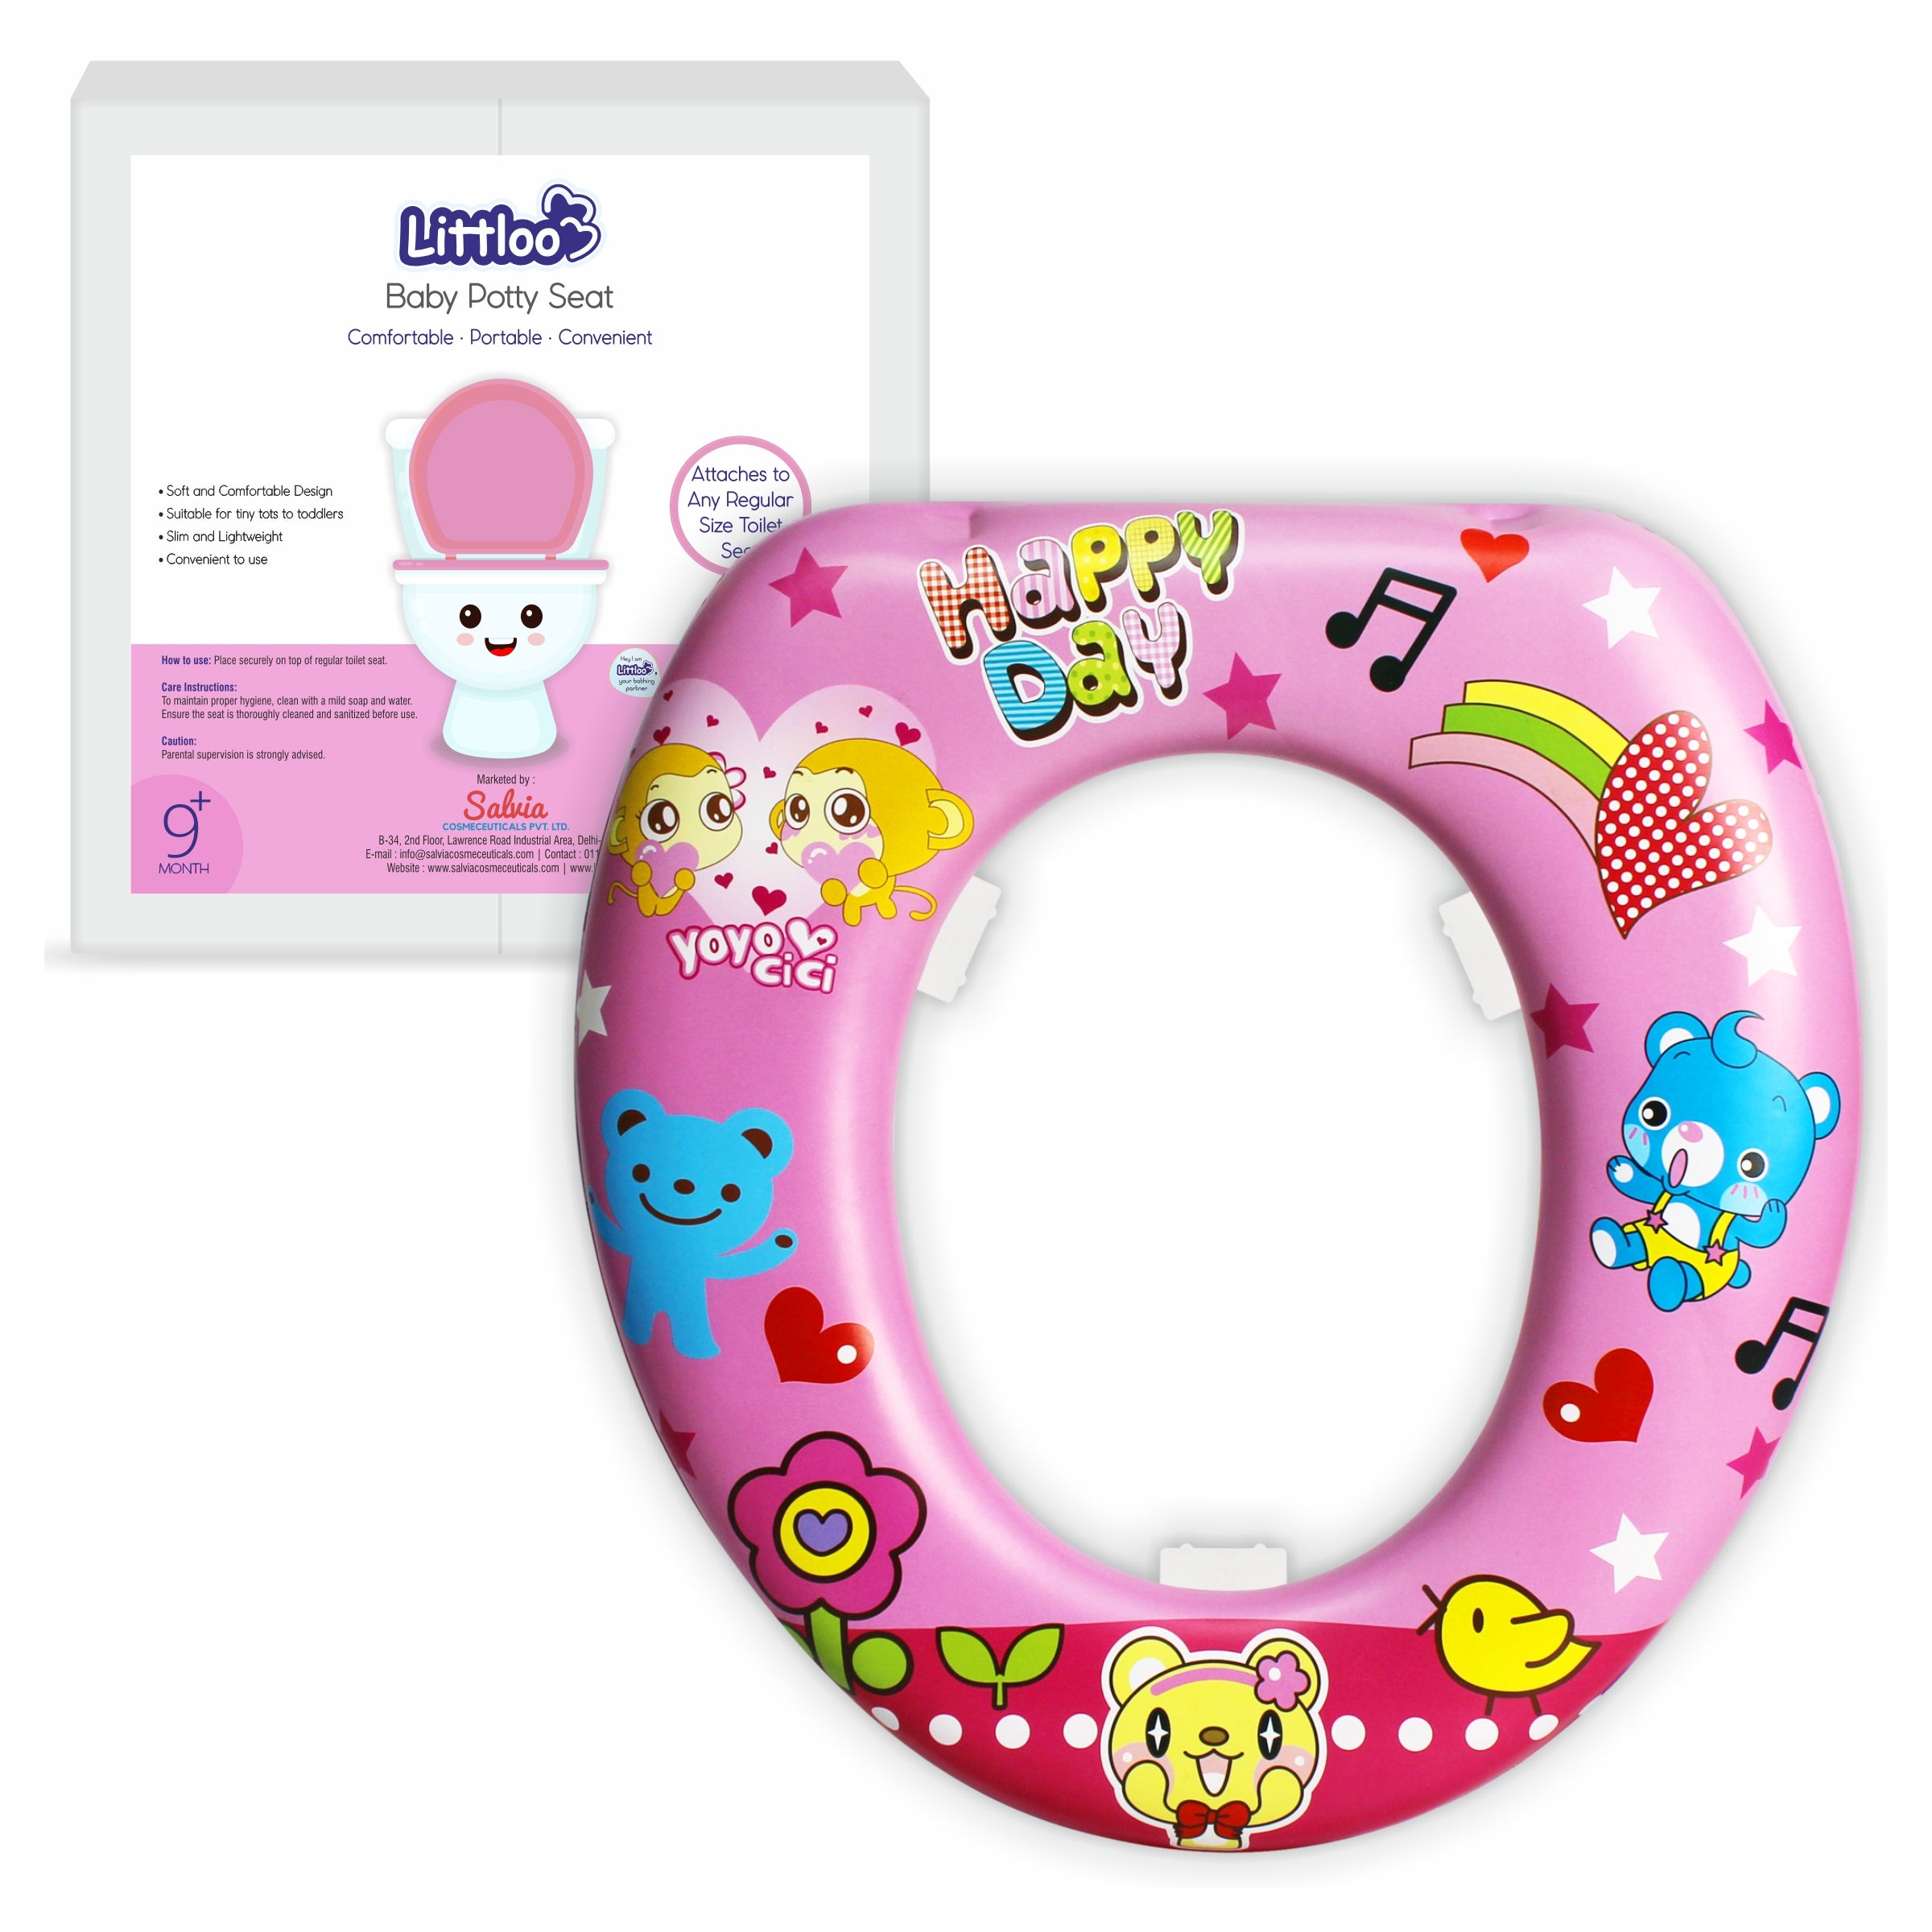 Littloo Baby Potty Seat - Comfort and Confidence for Your Toddler's Potty Training Journey - Pink - Littloo